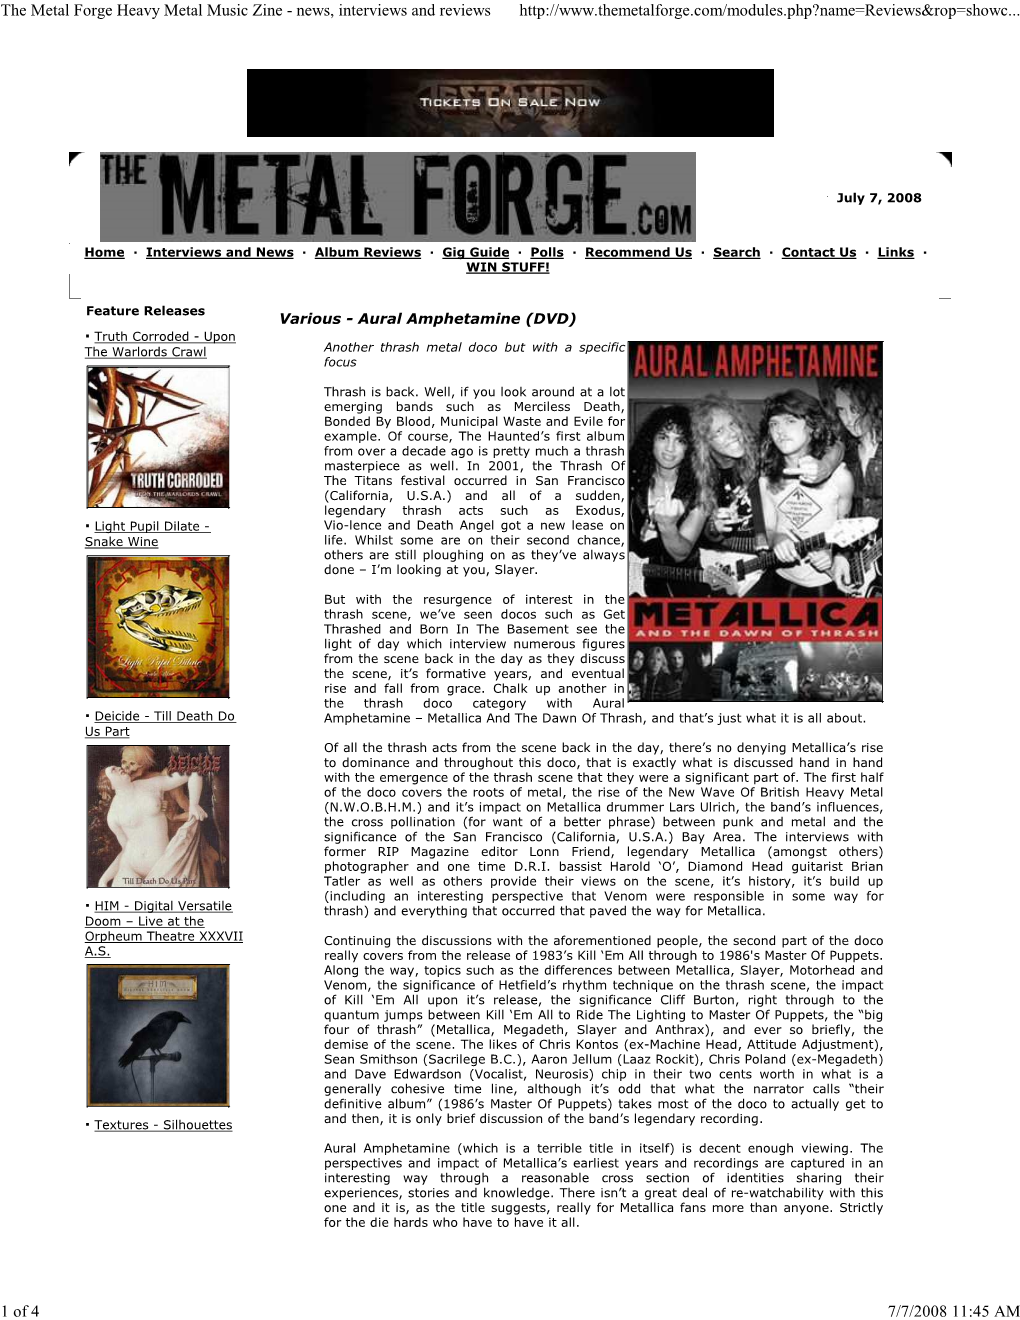 The Metal Forge Heavy Metal Music Zine - News, Interviews and Reviews